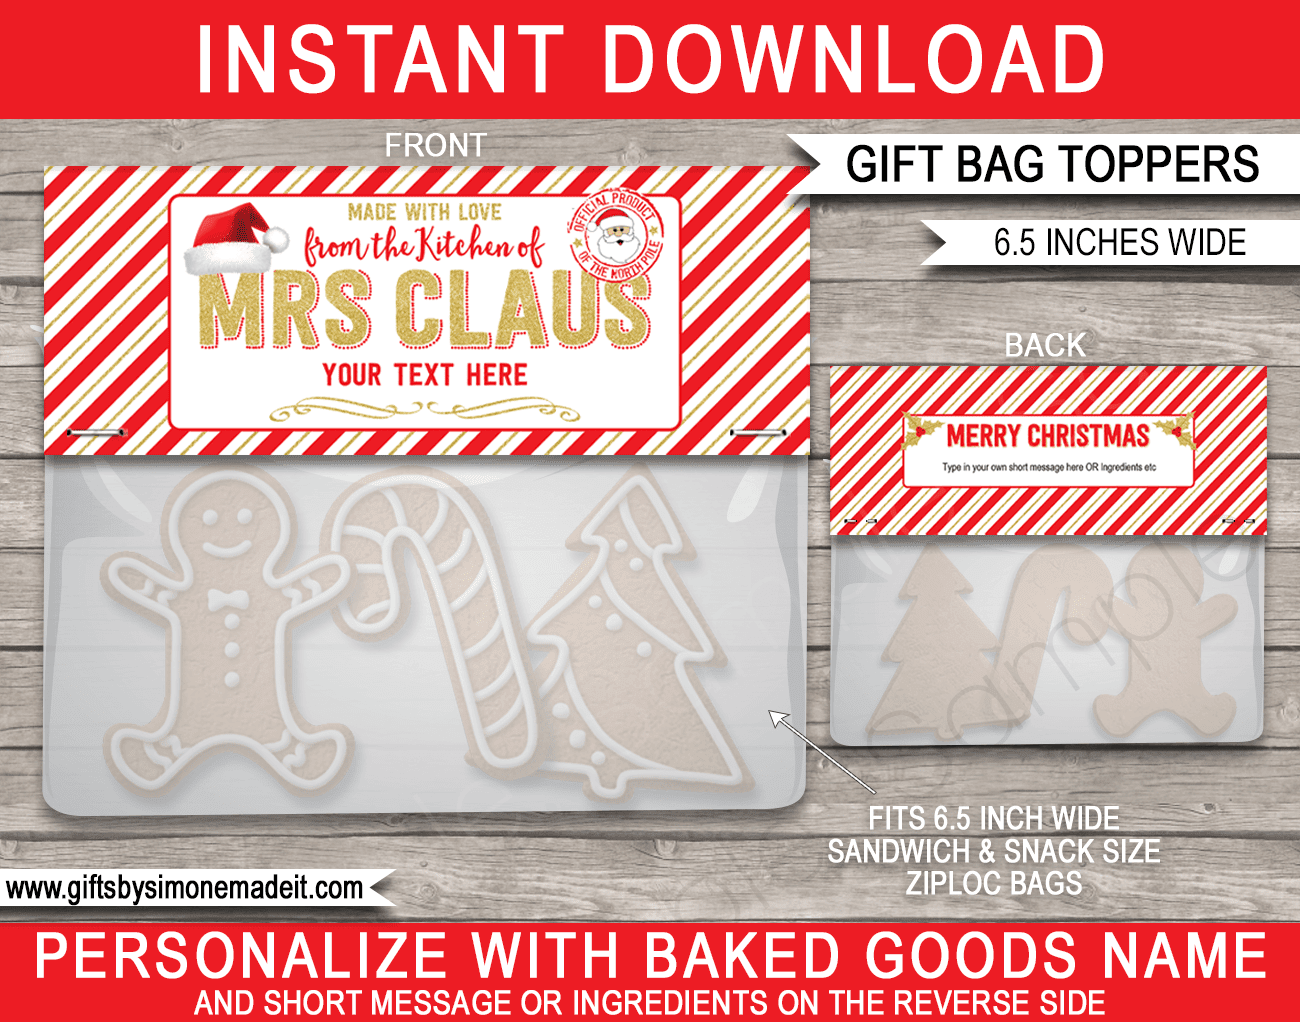 https://www.giftsbysimonemadeit.com/wp-content/uploads/2022/11/From-the-kitchen-of-Mrs-Claus-Gift-Bag-Toppers-Printable-Template.png